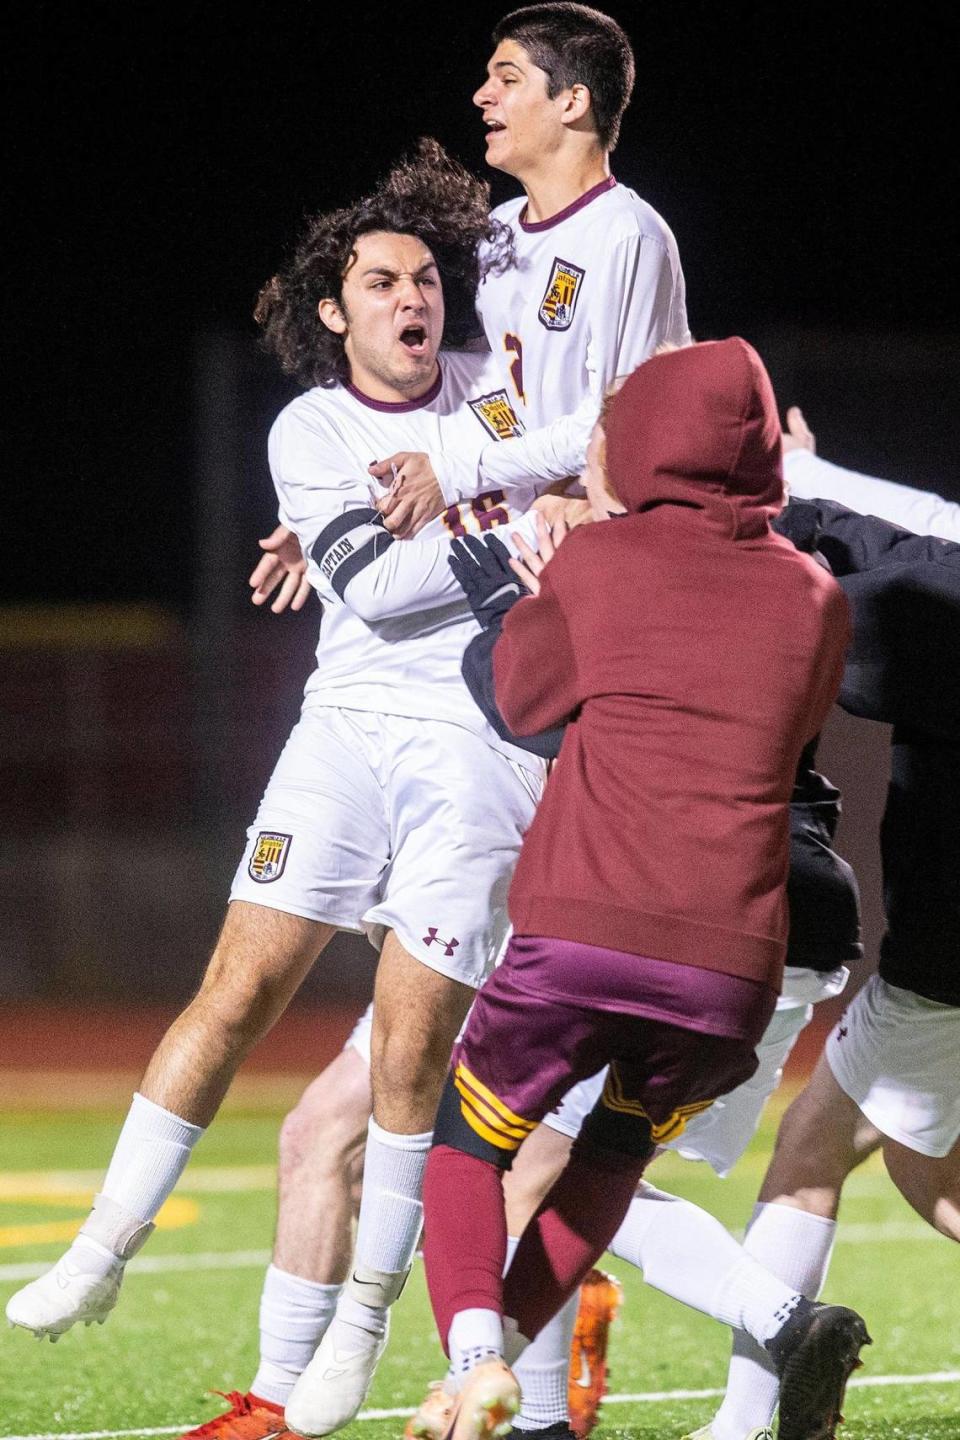 Las Lomas player Nathan Palavos (16) celebrates with teammates after defeating the Golden Valley Cougars 3-1 in penalty kicks during a NorCal Regional playoff game at Golden Valley High School in Merced, Calif., on Tuesday, Feb. 27, 2024.